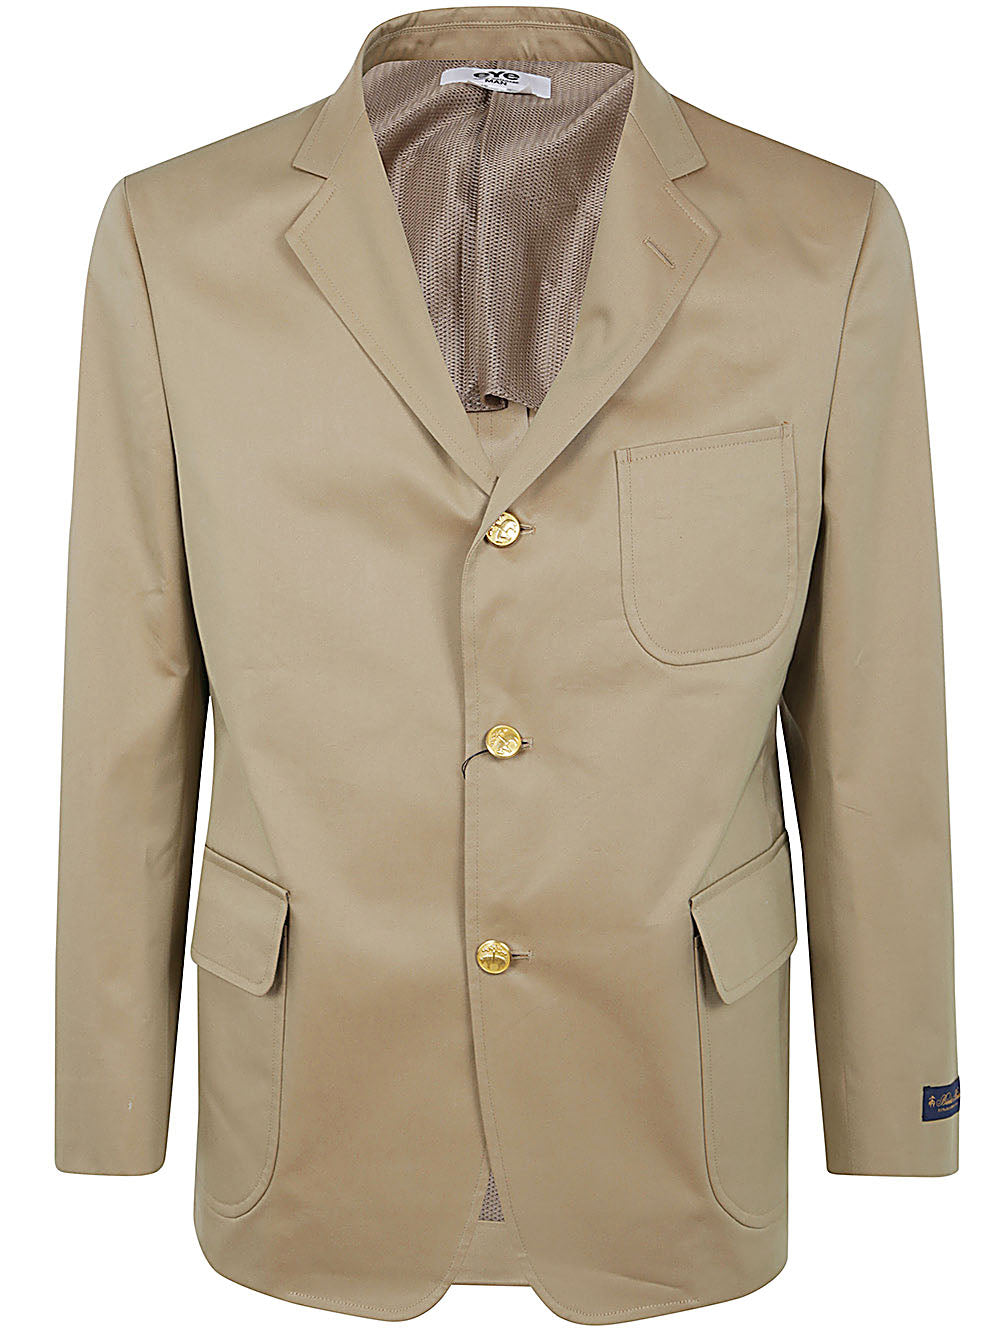 Brooks Brothers Collab Bomber Jacket